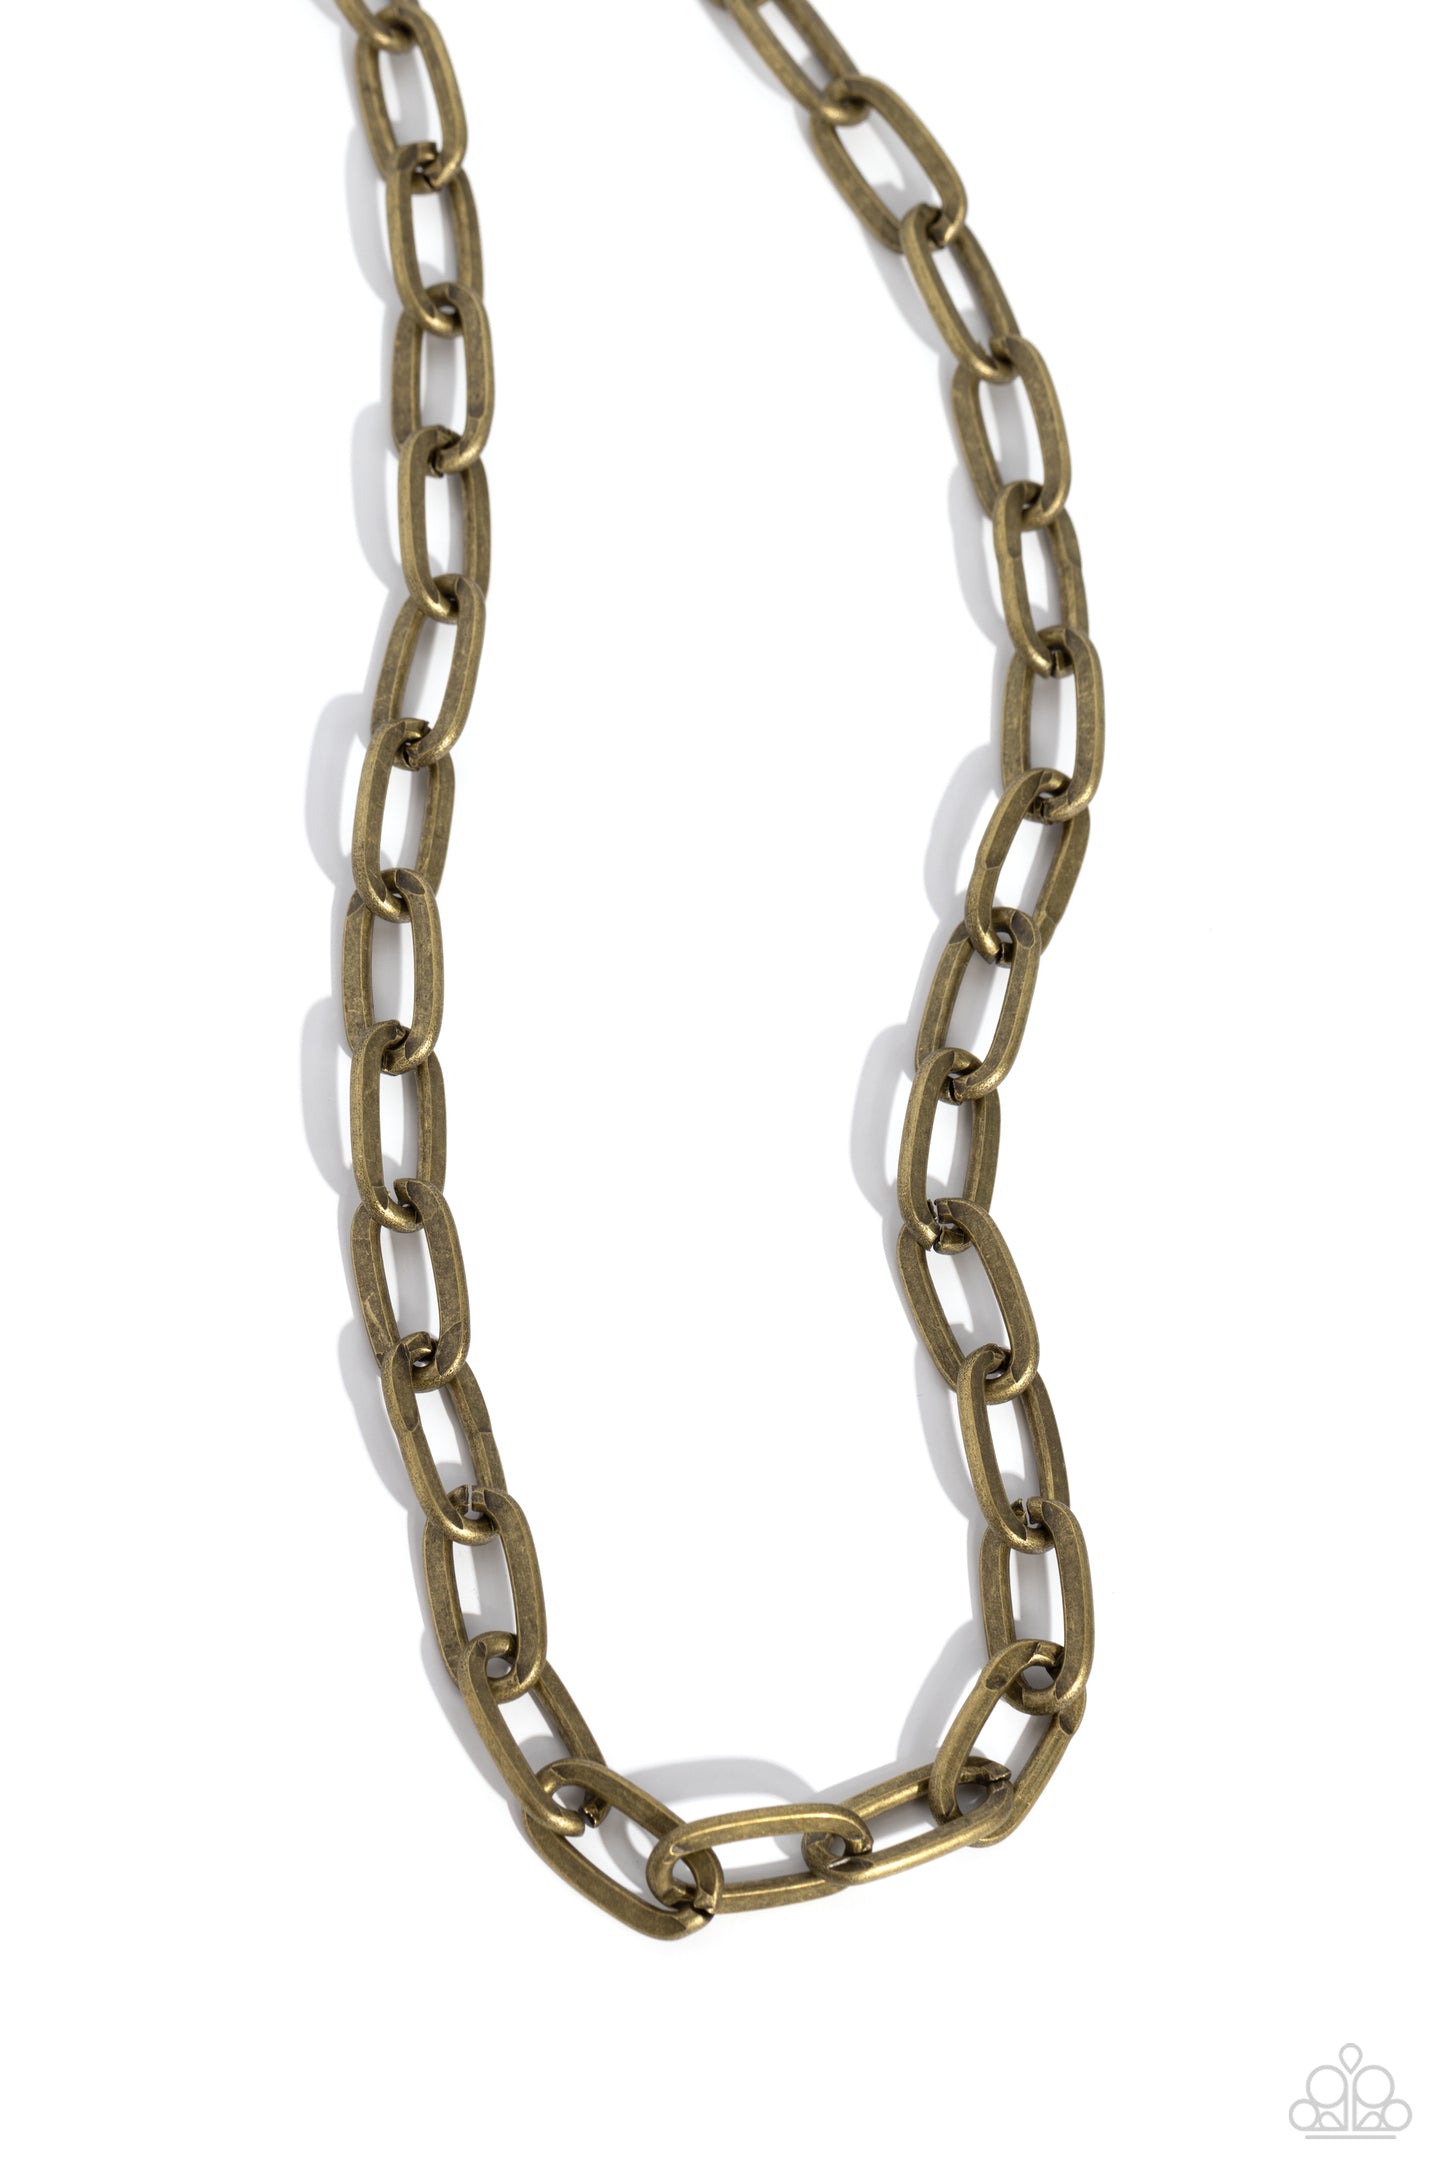 Featuring a rustic finish, an antiqued collection of oversized brass oval links boldly interlock across the chest for a grit-inspired look. Features an adjustable clasp closure.  Sold as one individual necklace.